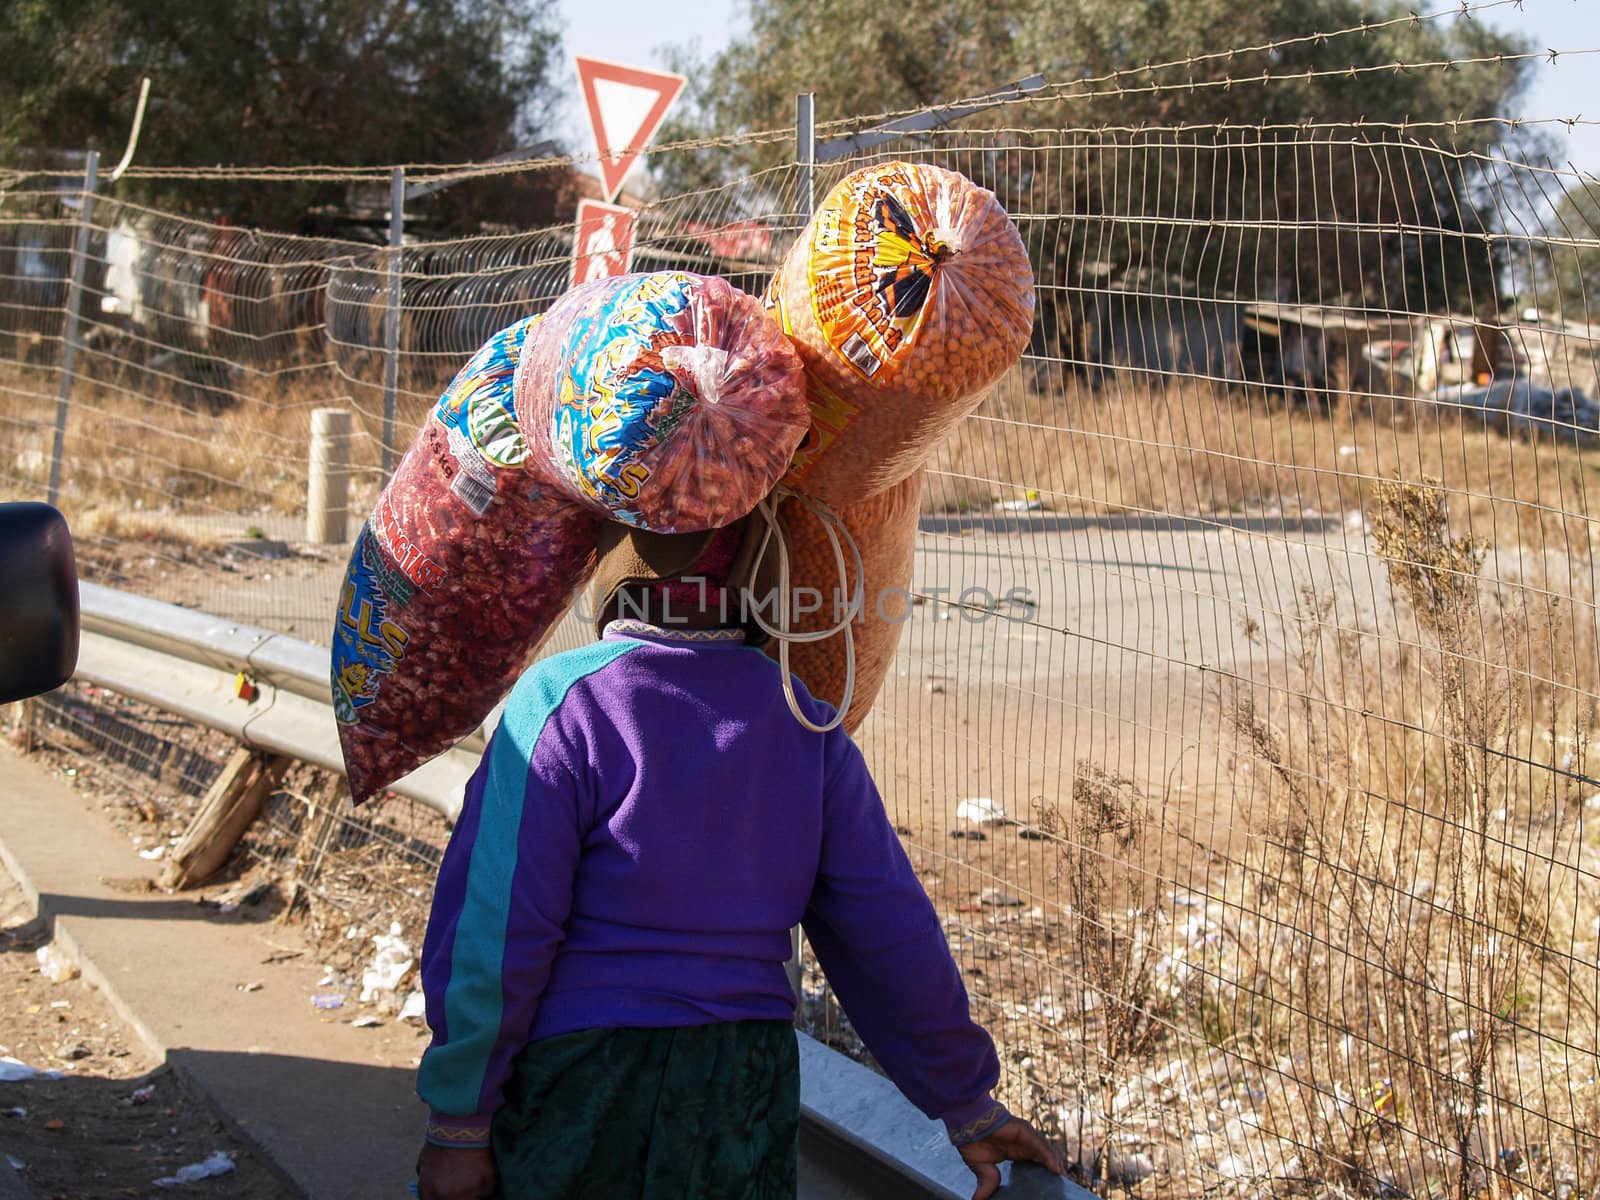 Lady walking away with two large bags of material, walking through the poor area of Soweto.